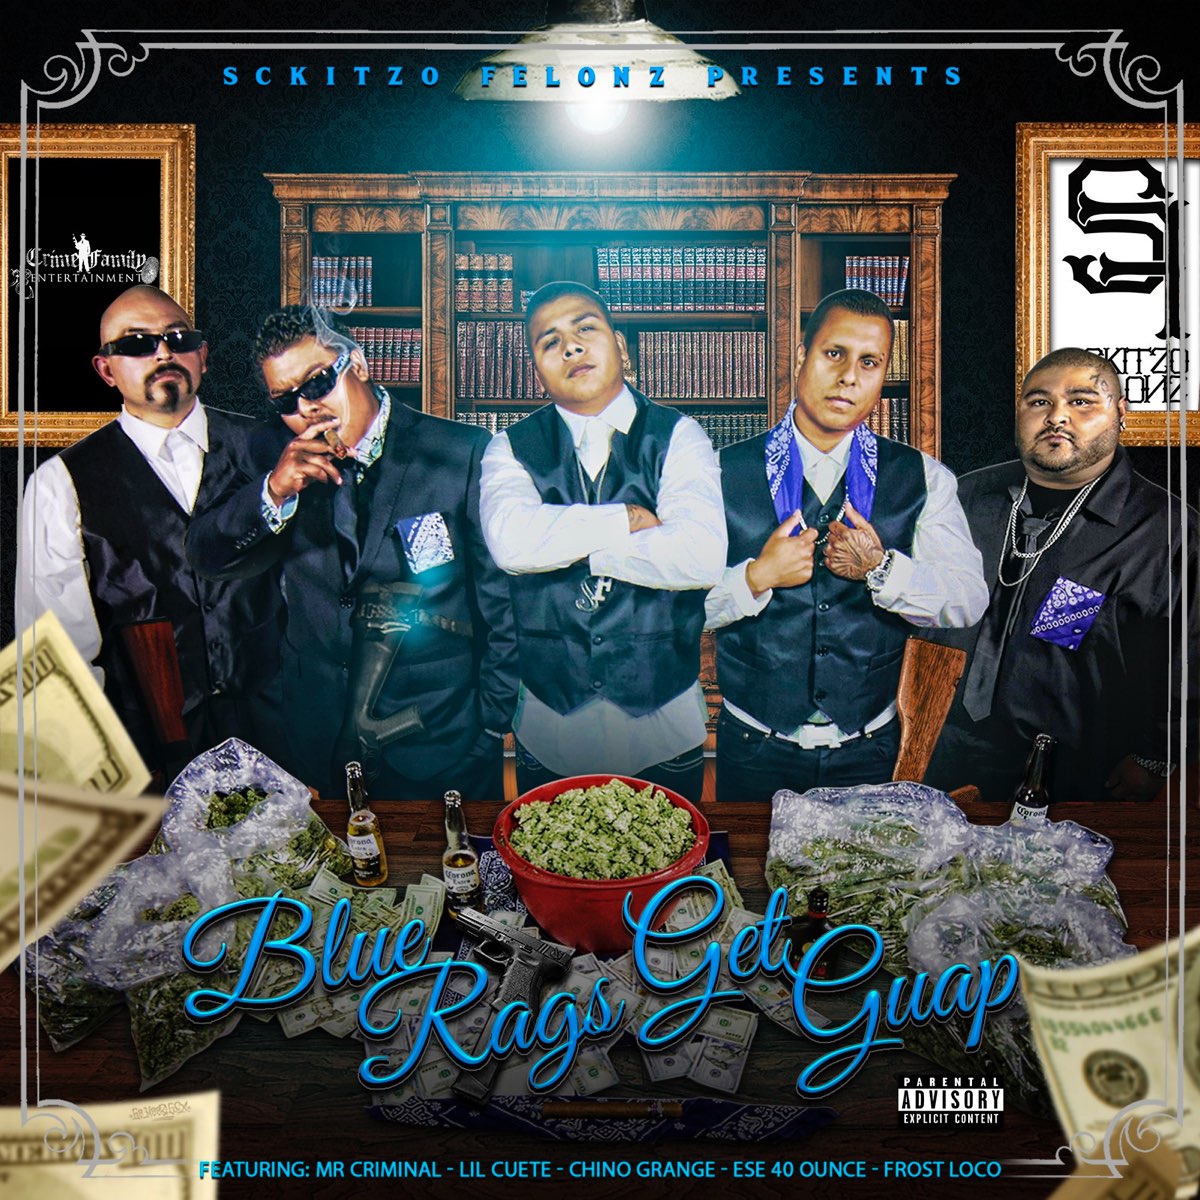 Sckitzo Felonz - Blue Rags Get Guap (The Takeover)